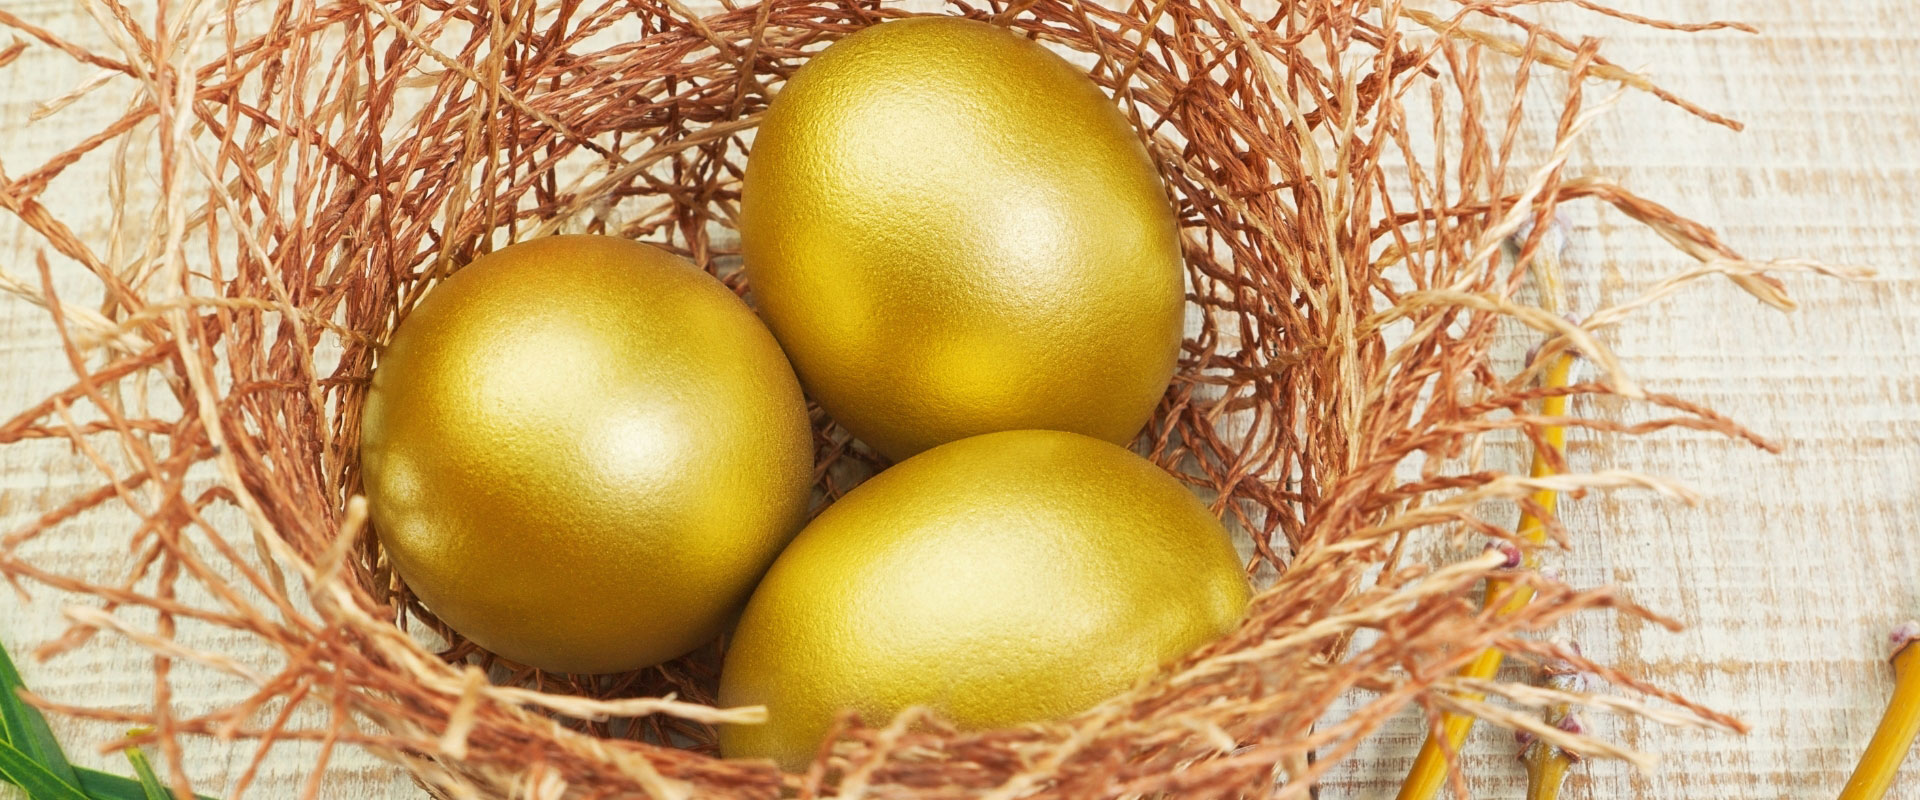 three gold eggs in a basket